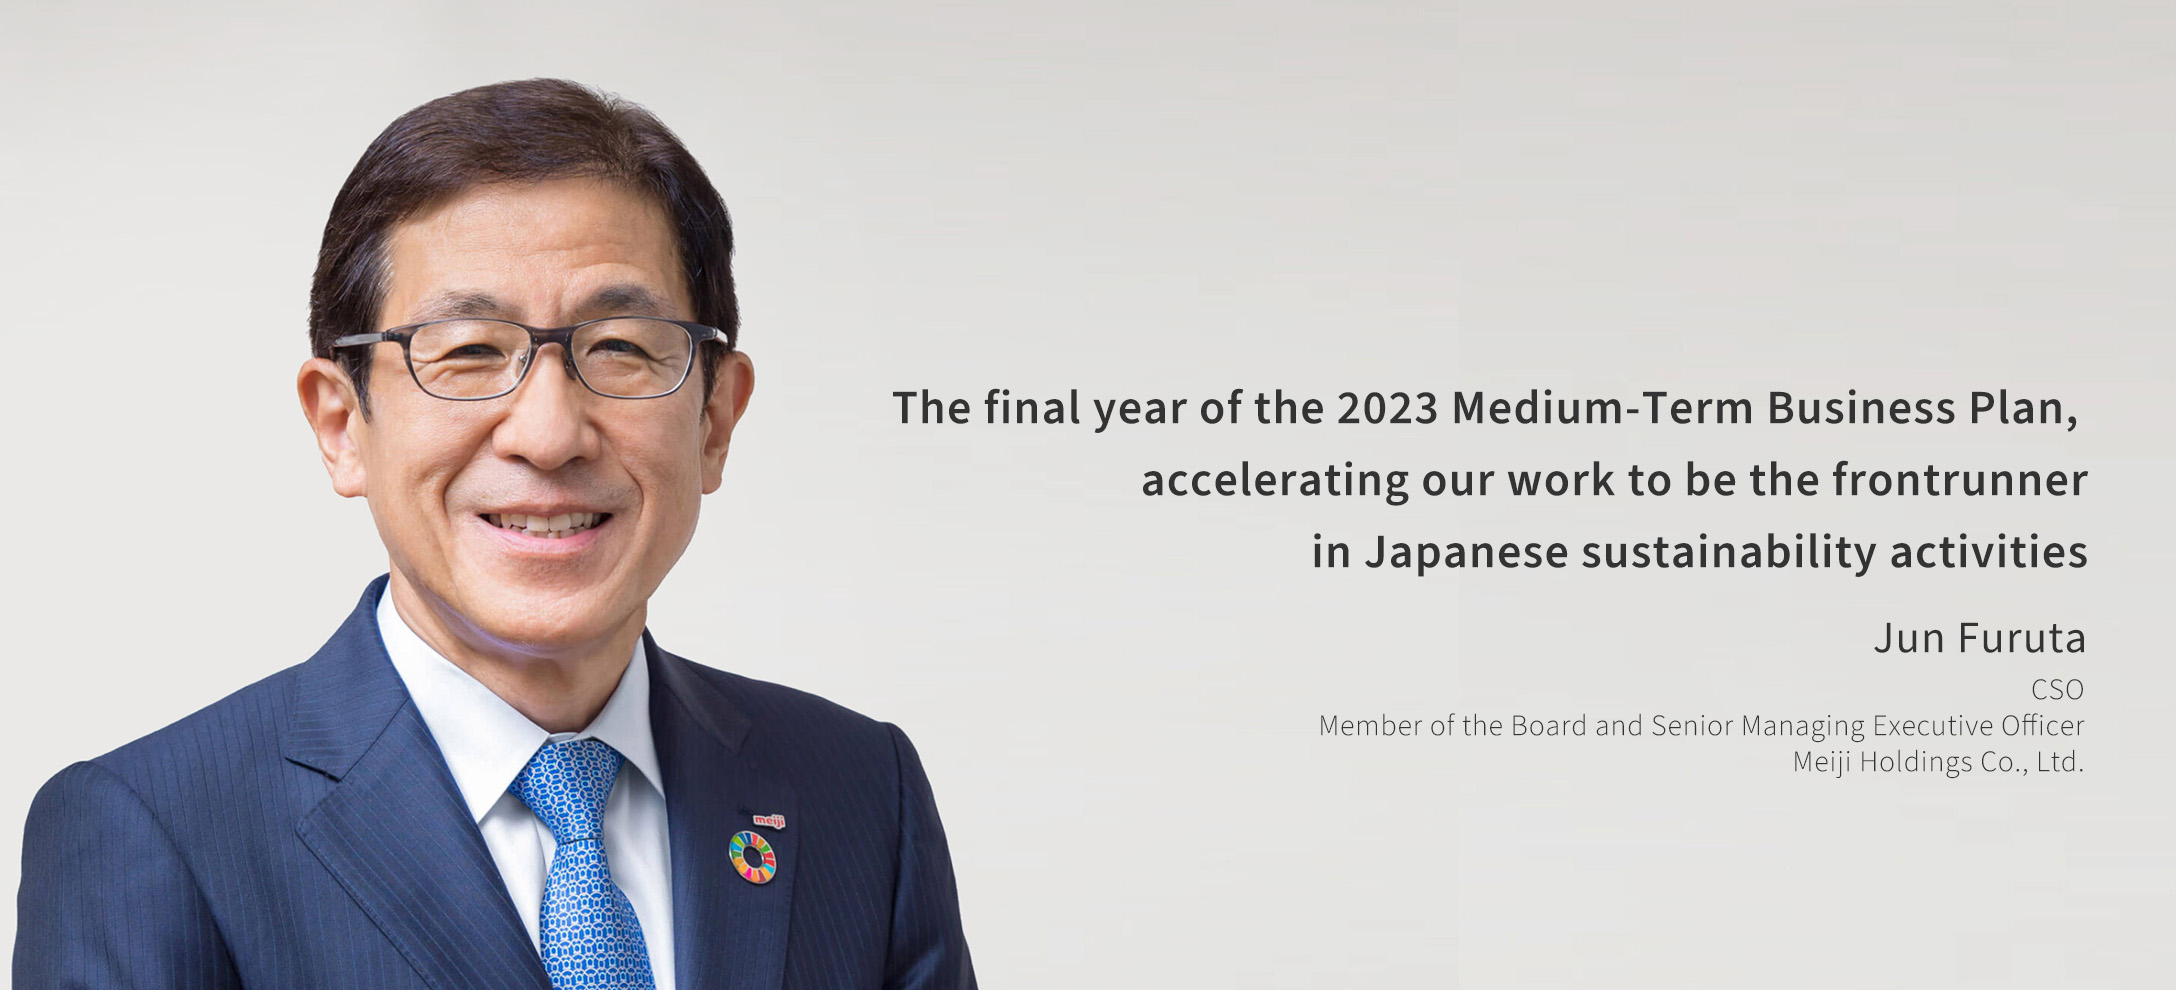 The final year of the 2023 Medium-Term Business Plan, accelerating our work to be the frontrunner in Japanese sustainability activities Jun Furuta CSO Member of the Board and Senior Managing Executive Officer Meiji Holding Co., Ltd.